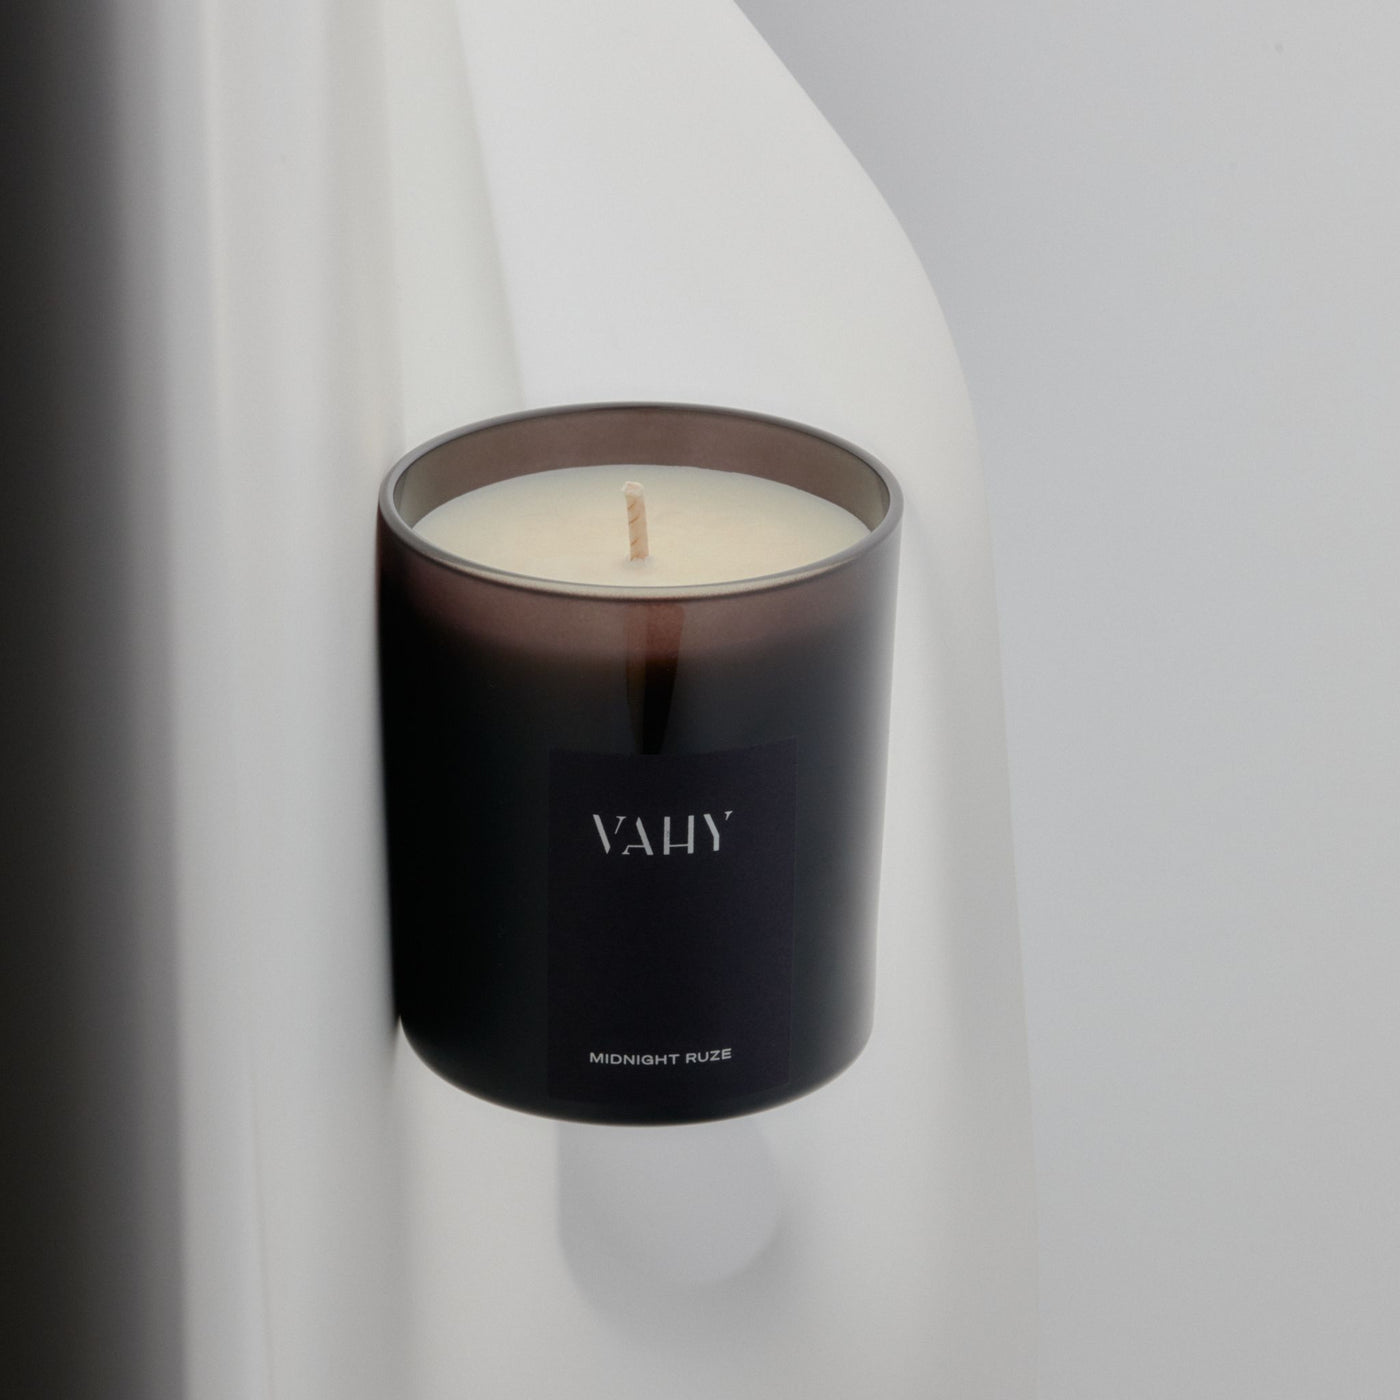 VAHY MIDNIGHT RUSE SCENTED CANDLE NON TOXIC AWARD WINNING